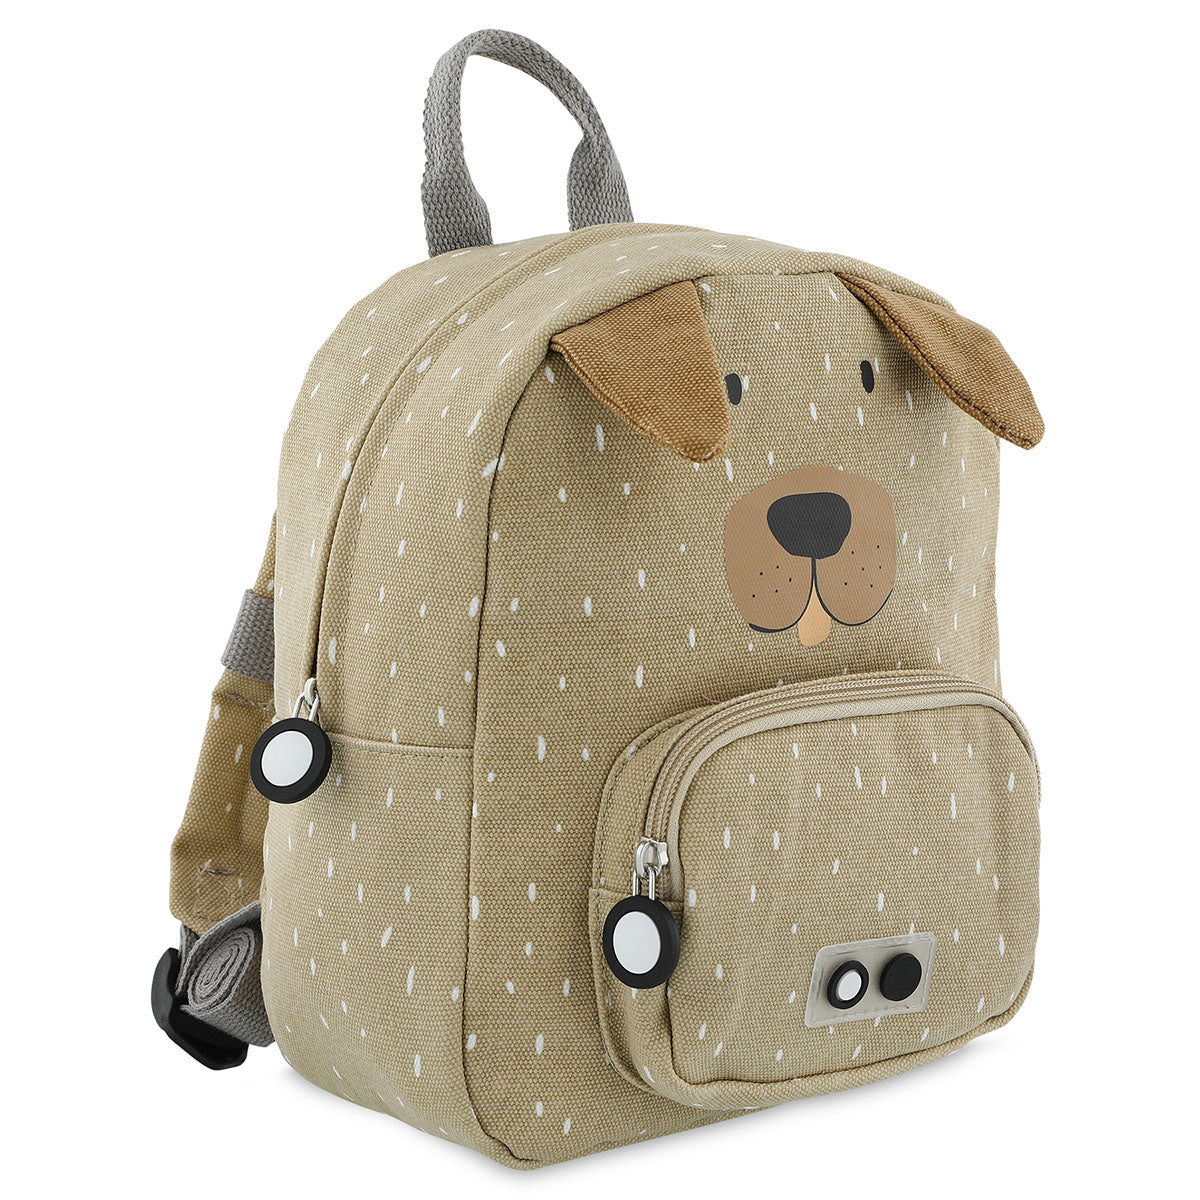 Trixie Mr. Dog backpack small